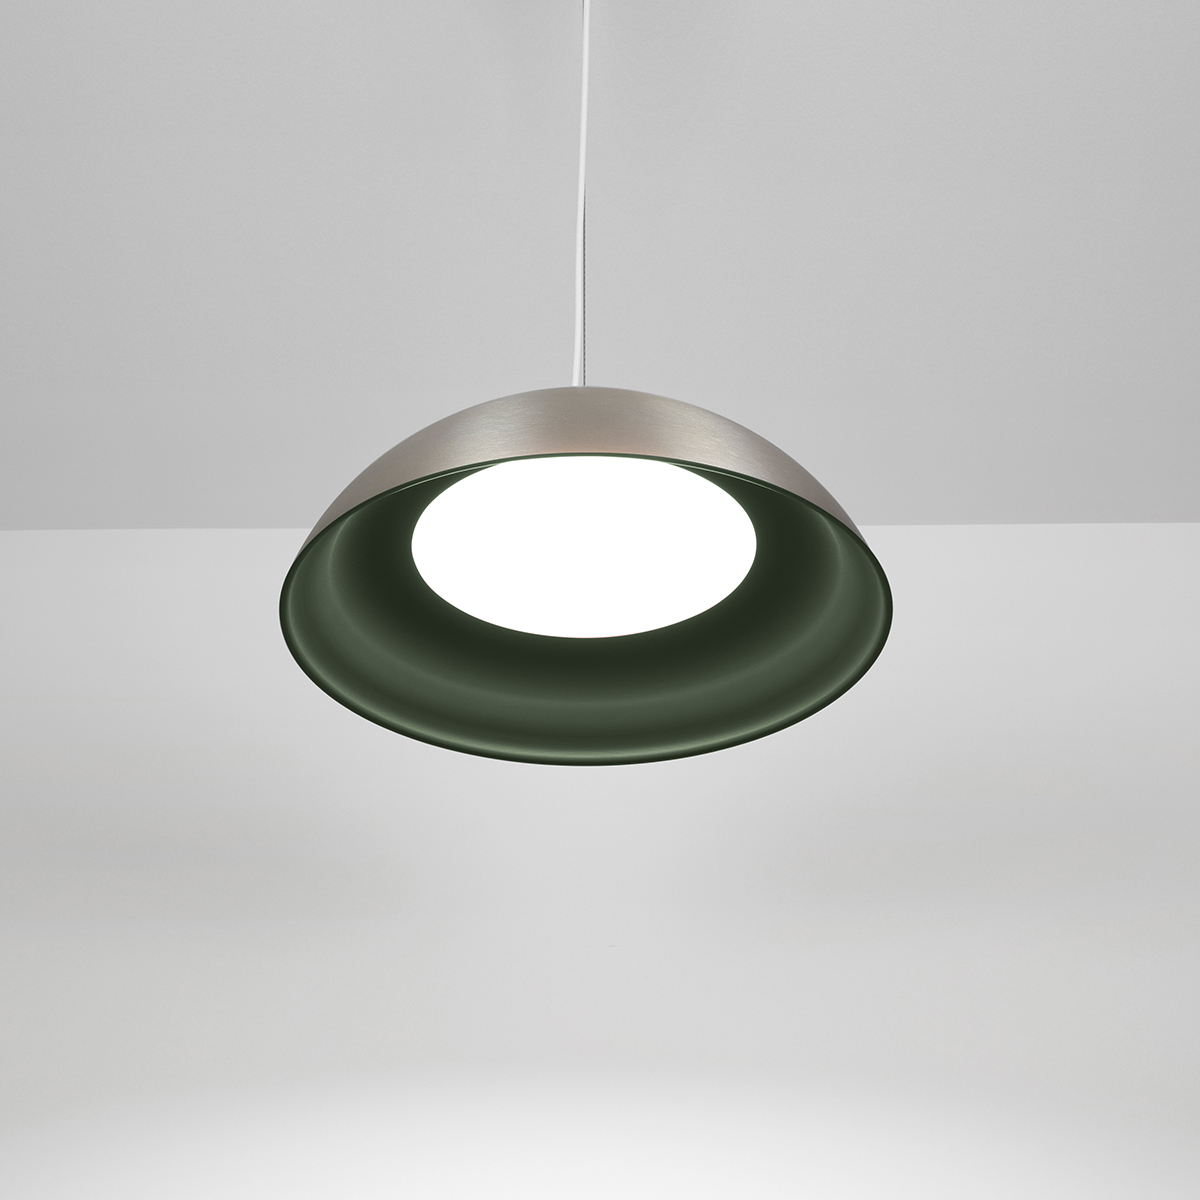 Dome pendant light with LED lighting